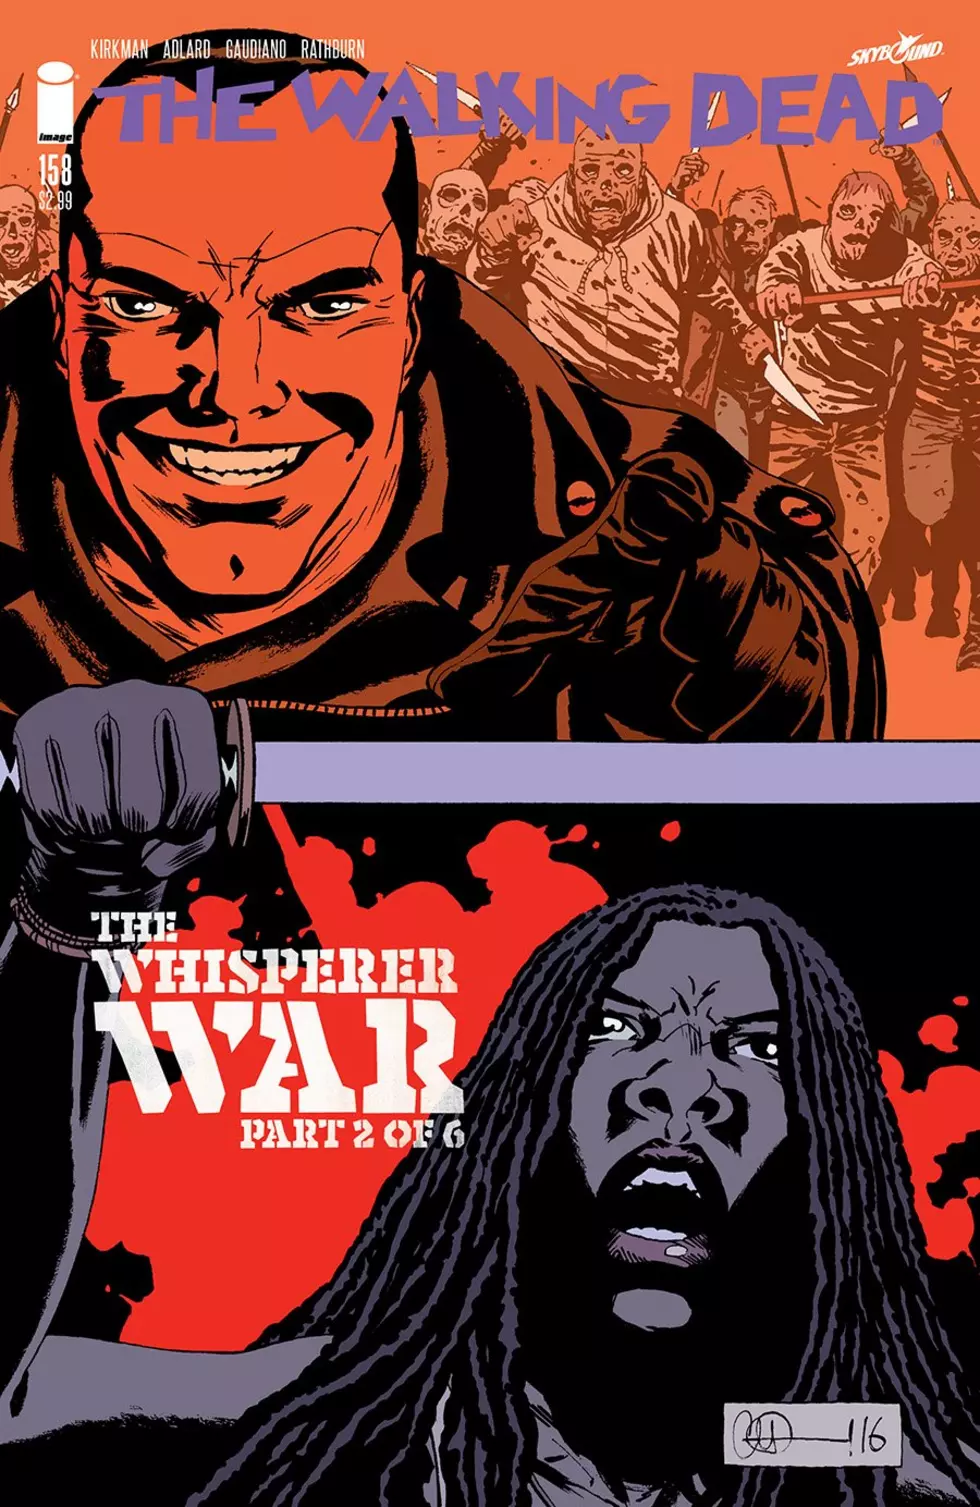 The Rob and Gavin Review The Walking Dead #158!